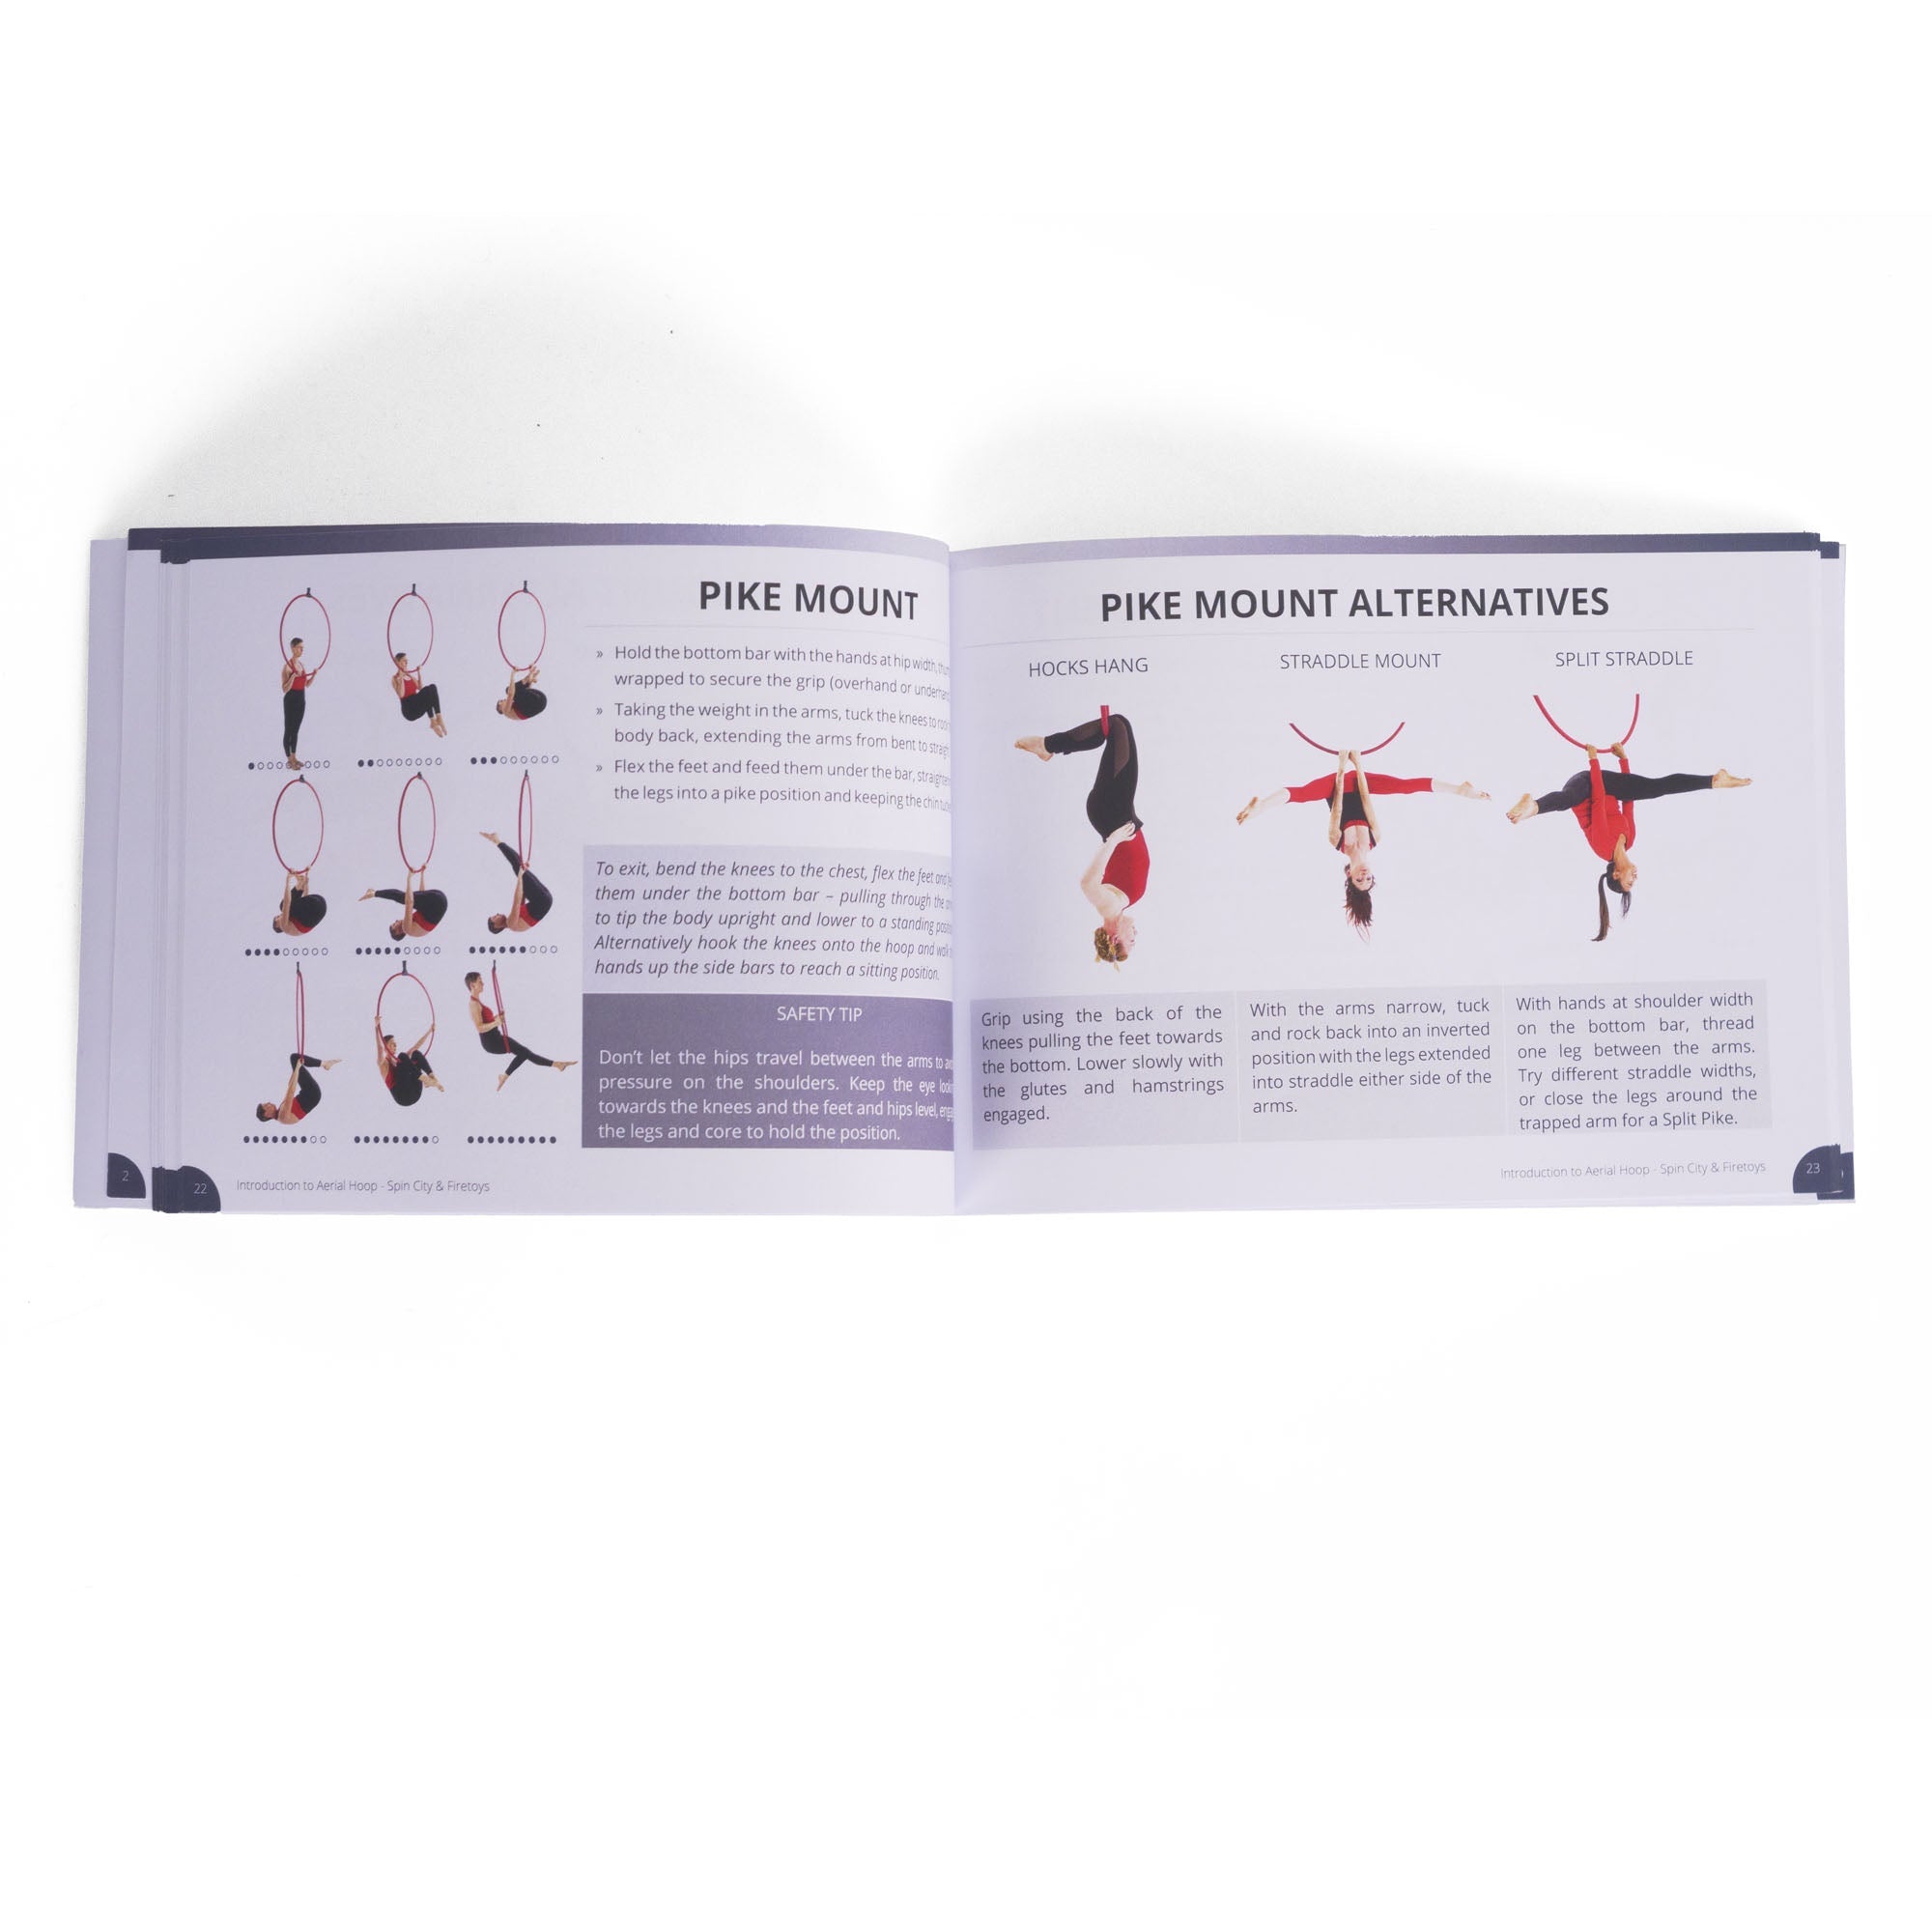 Example pages from Introduction to Aerial Hoop book showing the Pike Mount and Pike Mount Alternatives with pictures and words